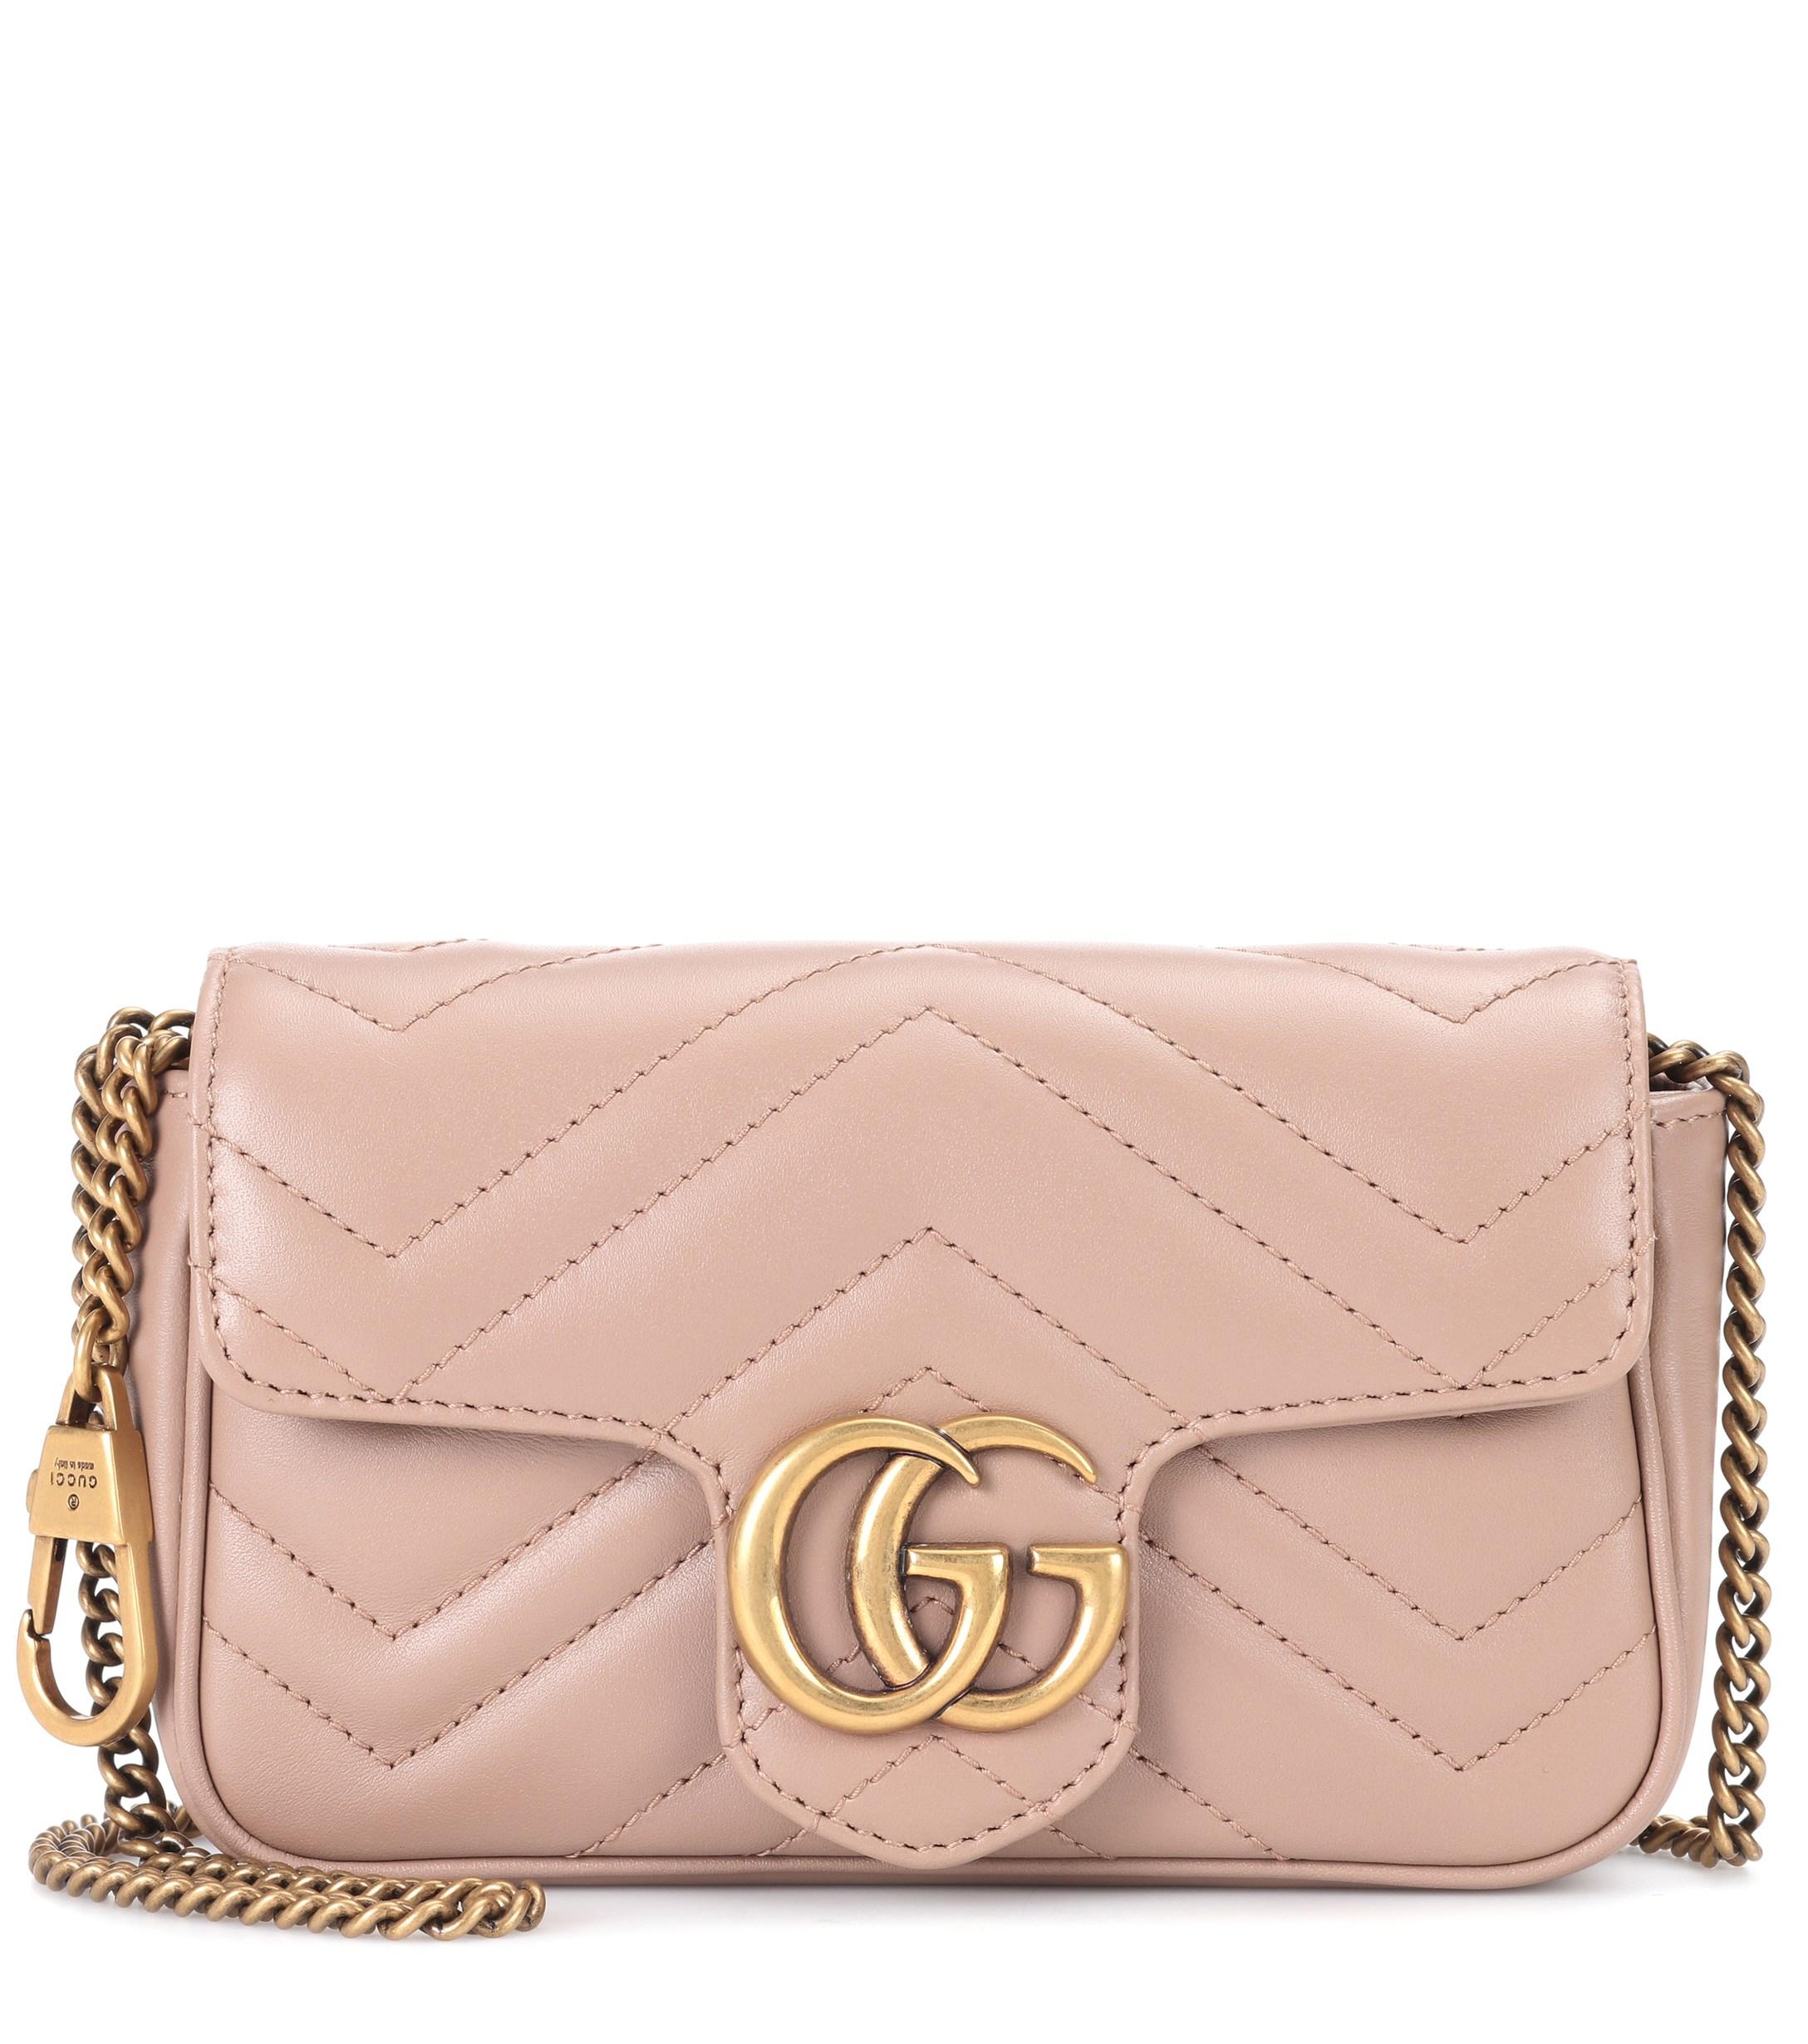 Gucci GG Marmont Mini Shoulder Bag in Pink - Lyst